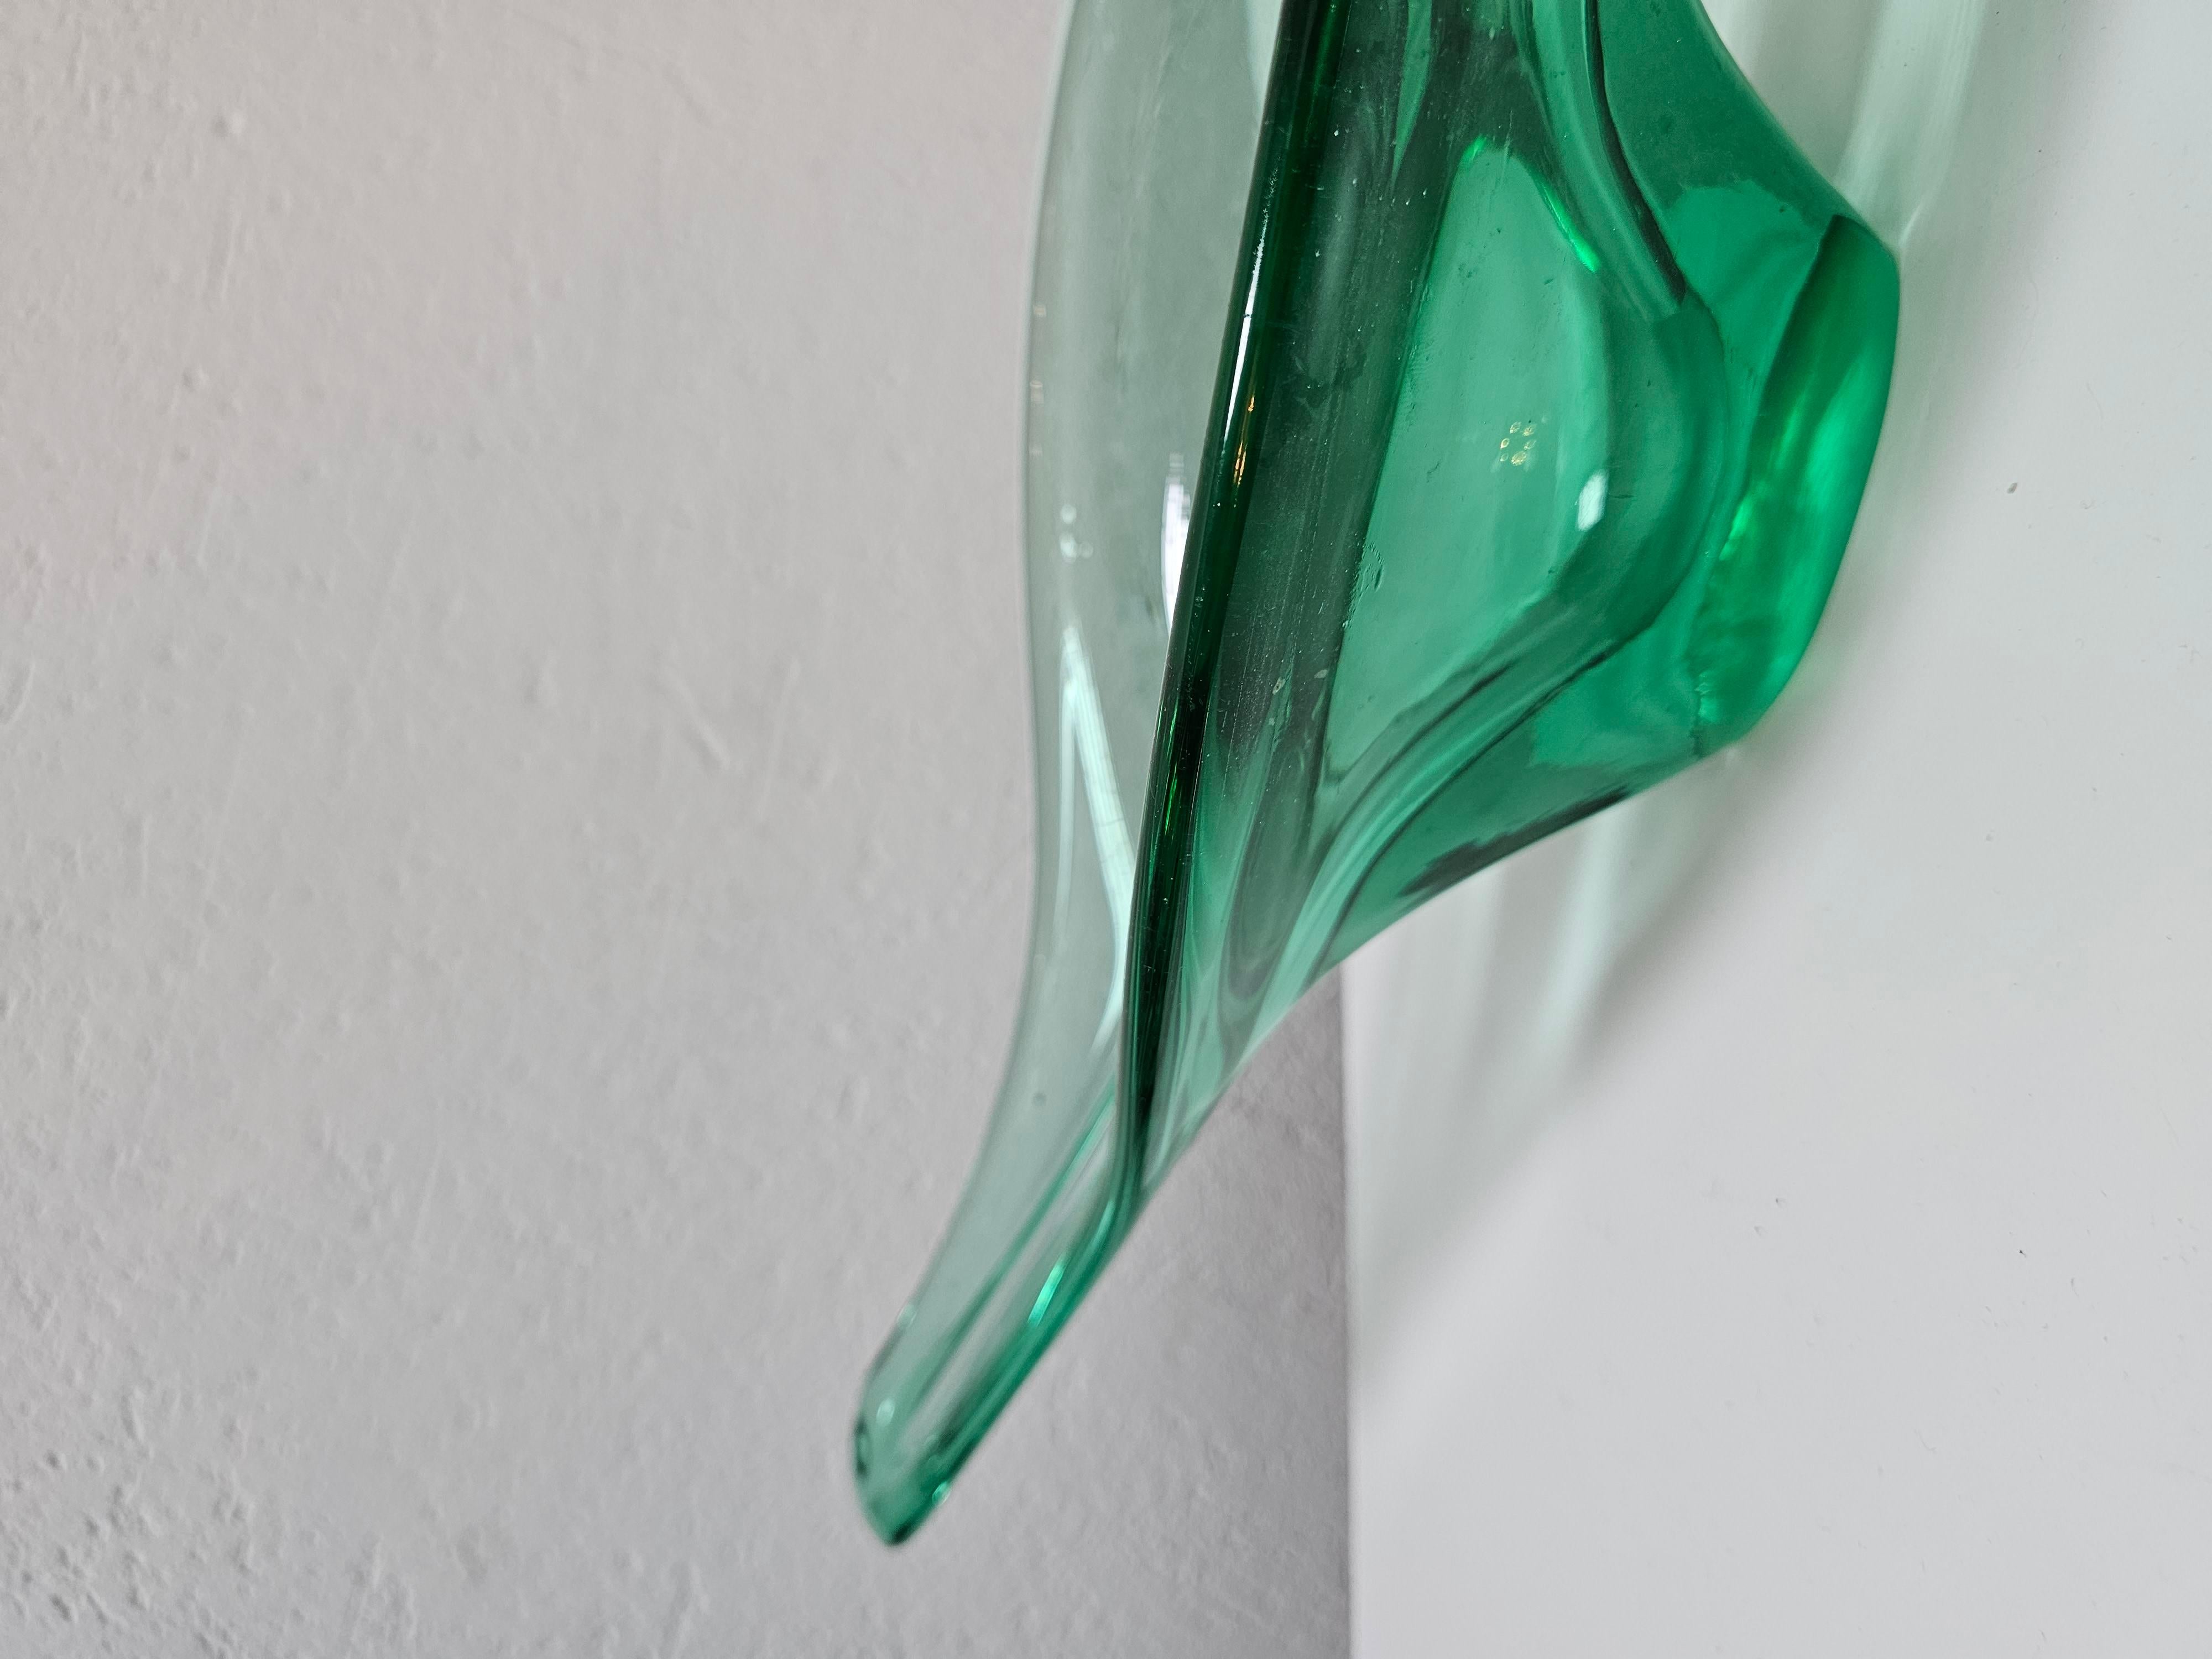 In this listing you will find a gorgeous and very rare XXL green Murano glass bowl shaped as gondola. Handmade in Murano, Italy in 1960s.

Excellent vintage condition. No dents.

DIMENSIONS
Length: 54cm // 22 inches
Width: 17cm // 7 inches
Height: